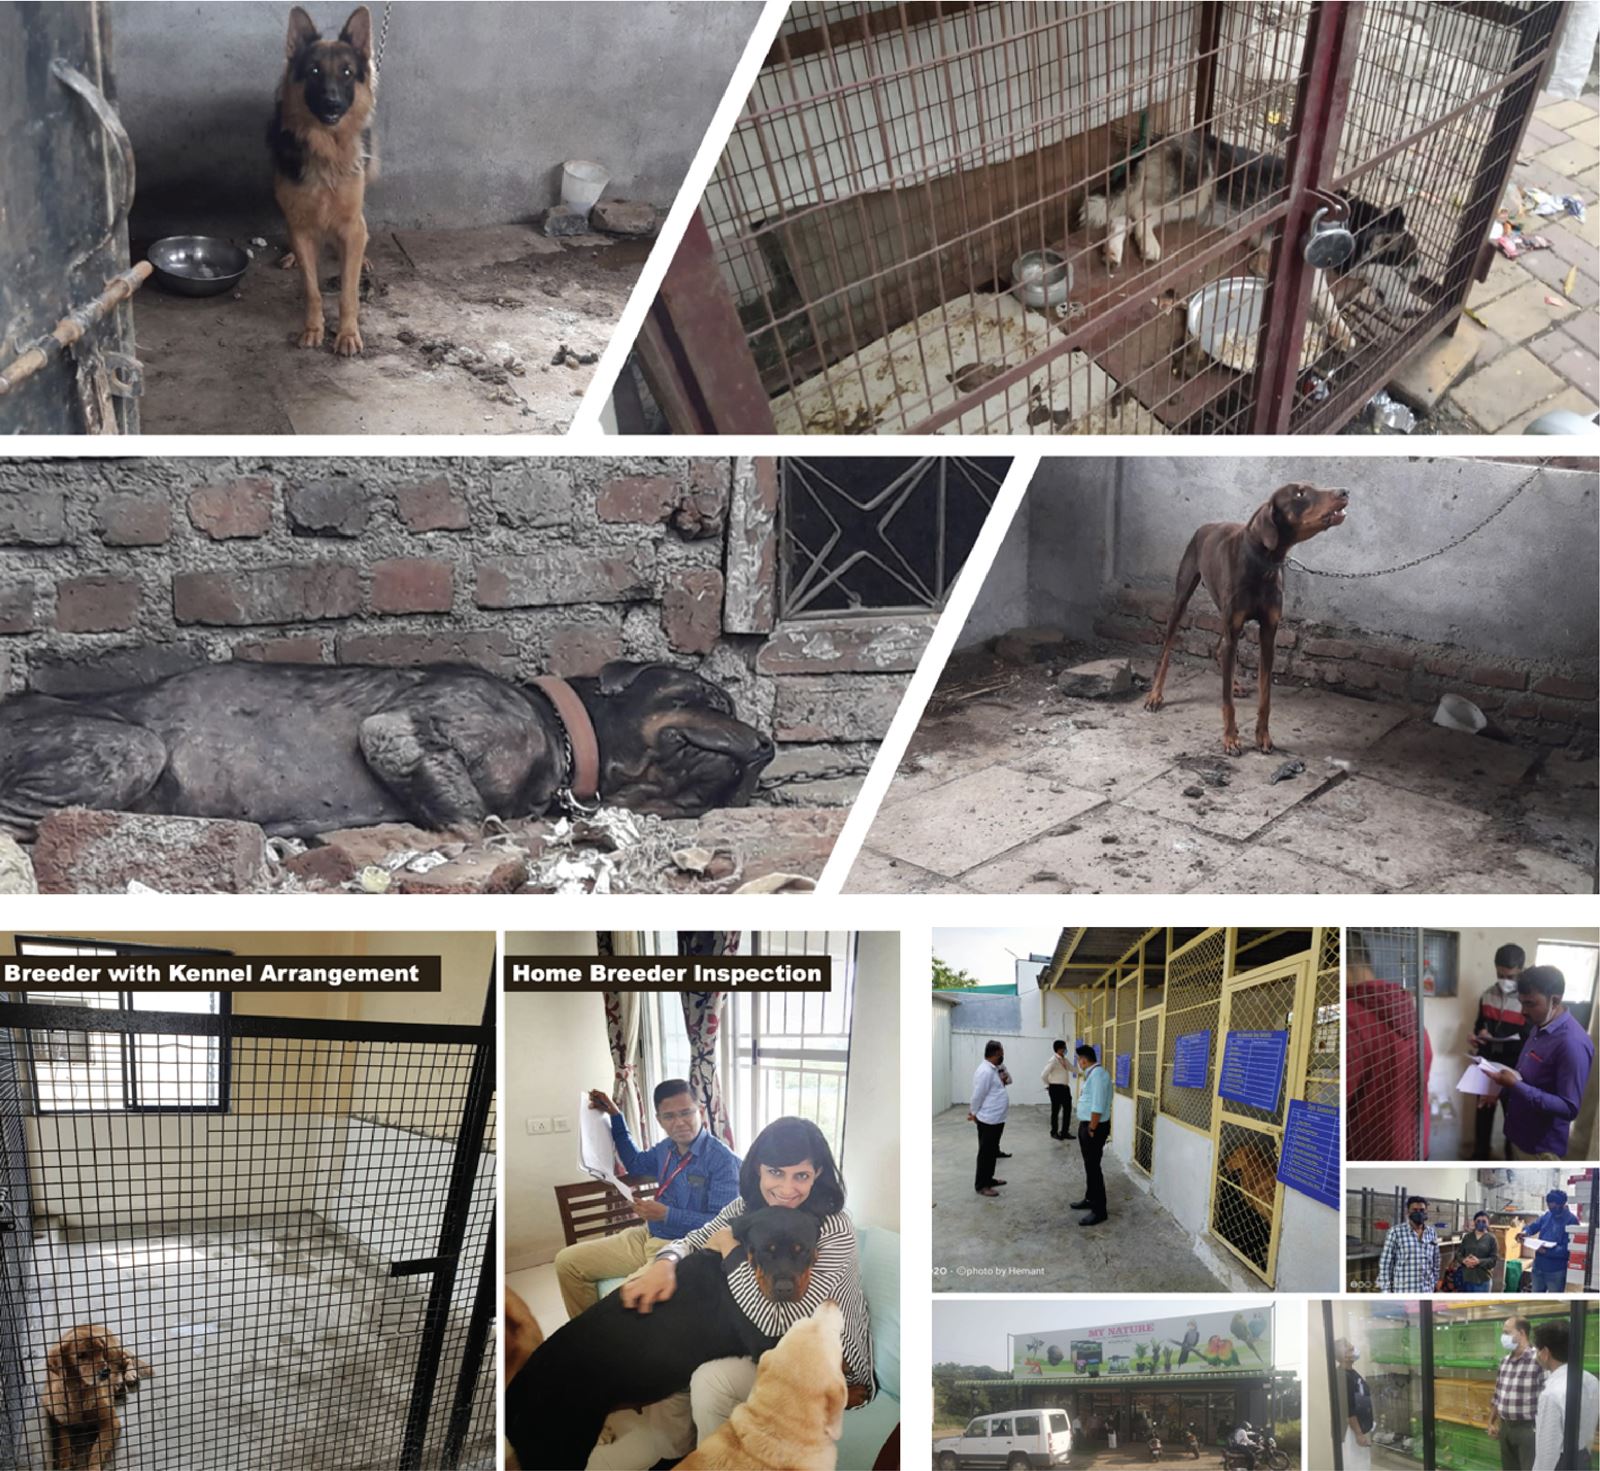 Inspections of Pet Shops and Dog Breeders being conducted by the District SPCA